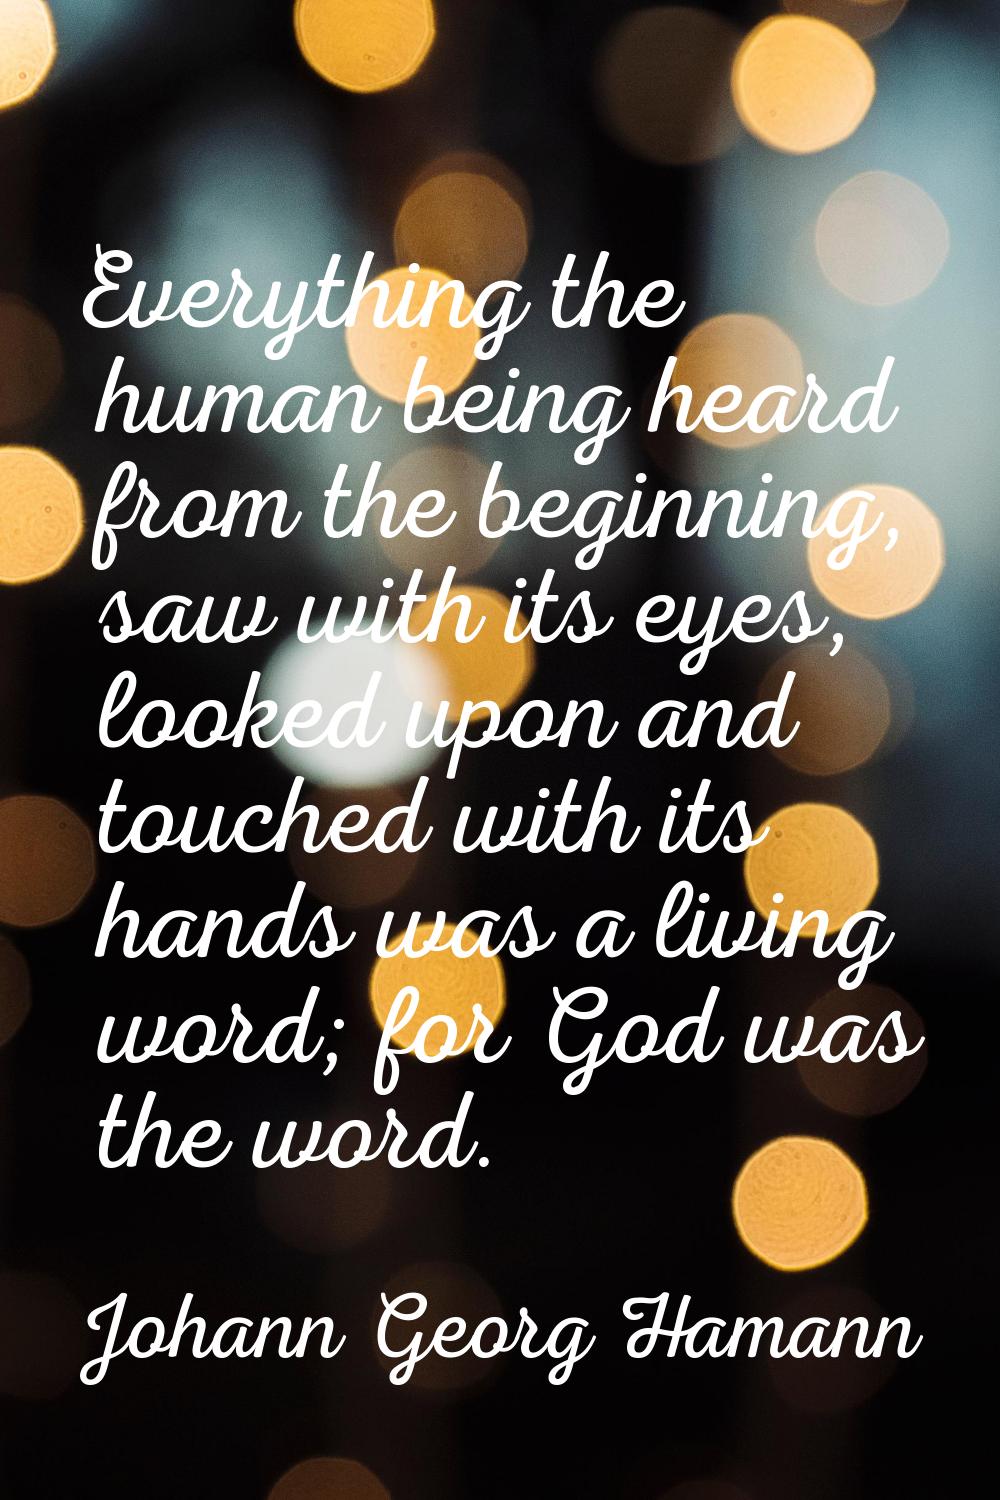 Everything the human being heard from the beginning, saw with its eyes, looked upon and touched wit